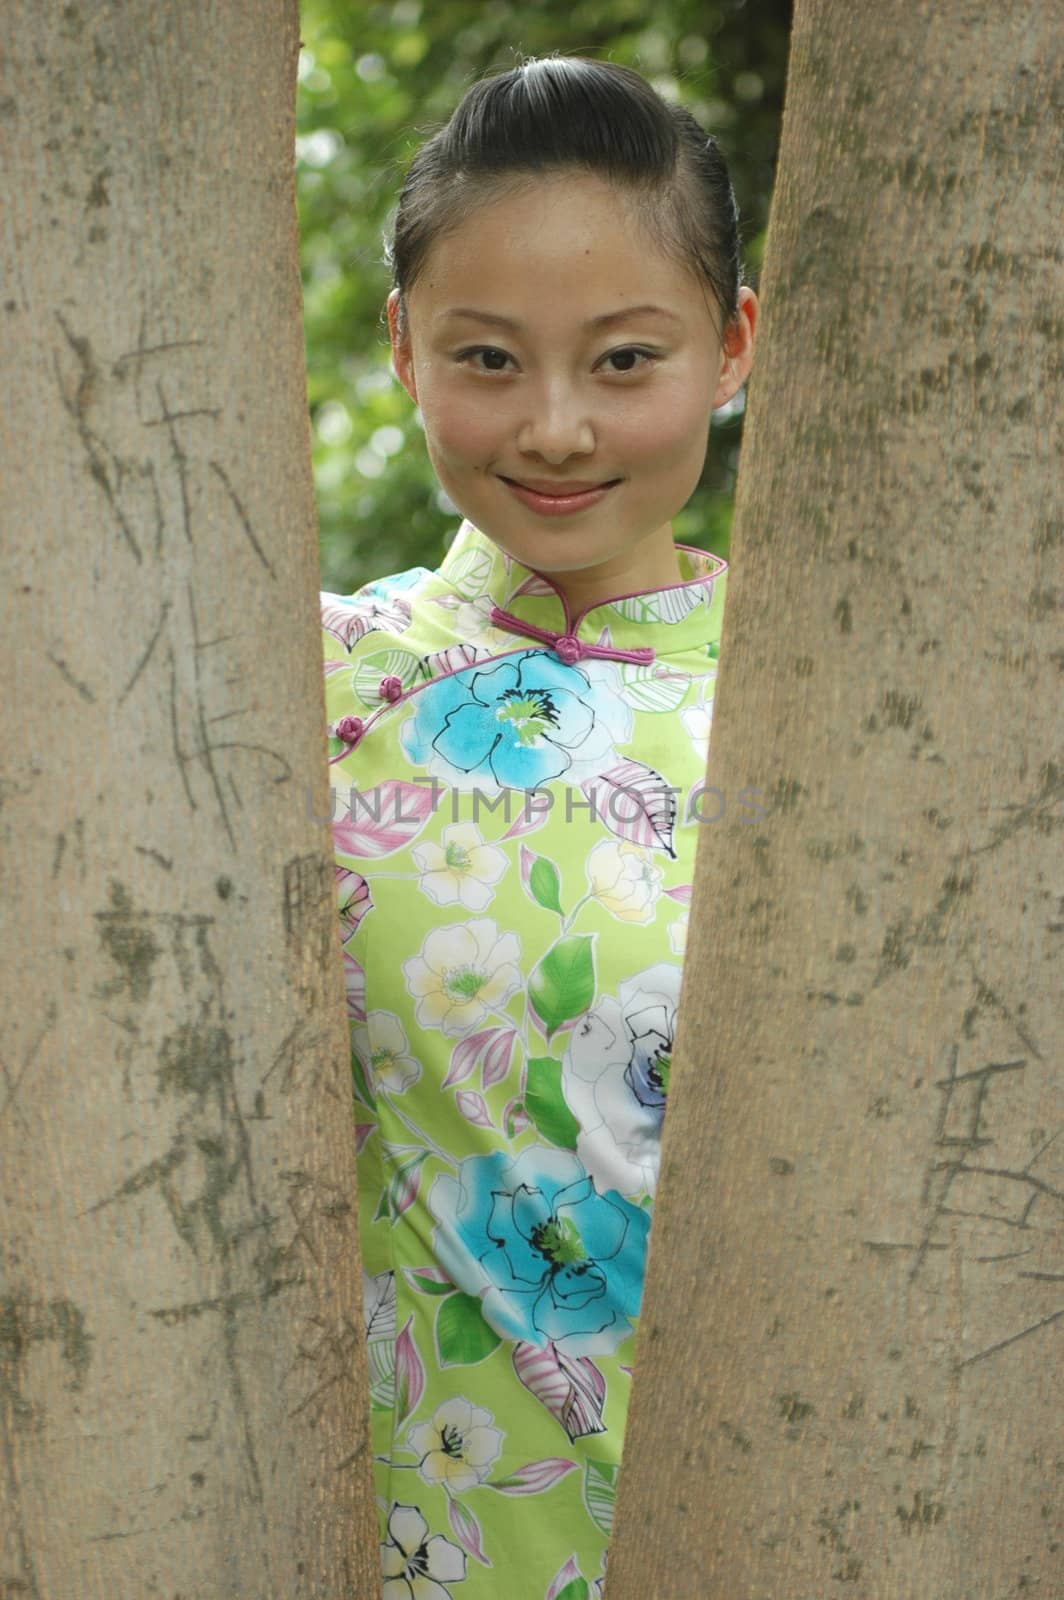 Chinese girl standing between trees in park.